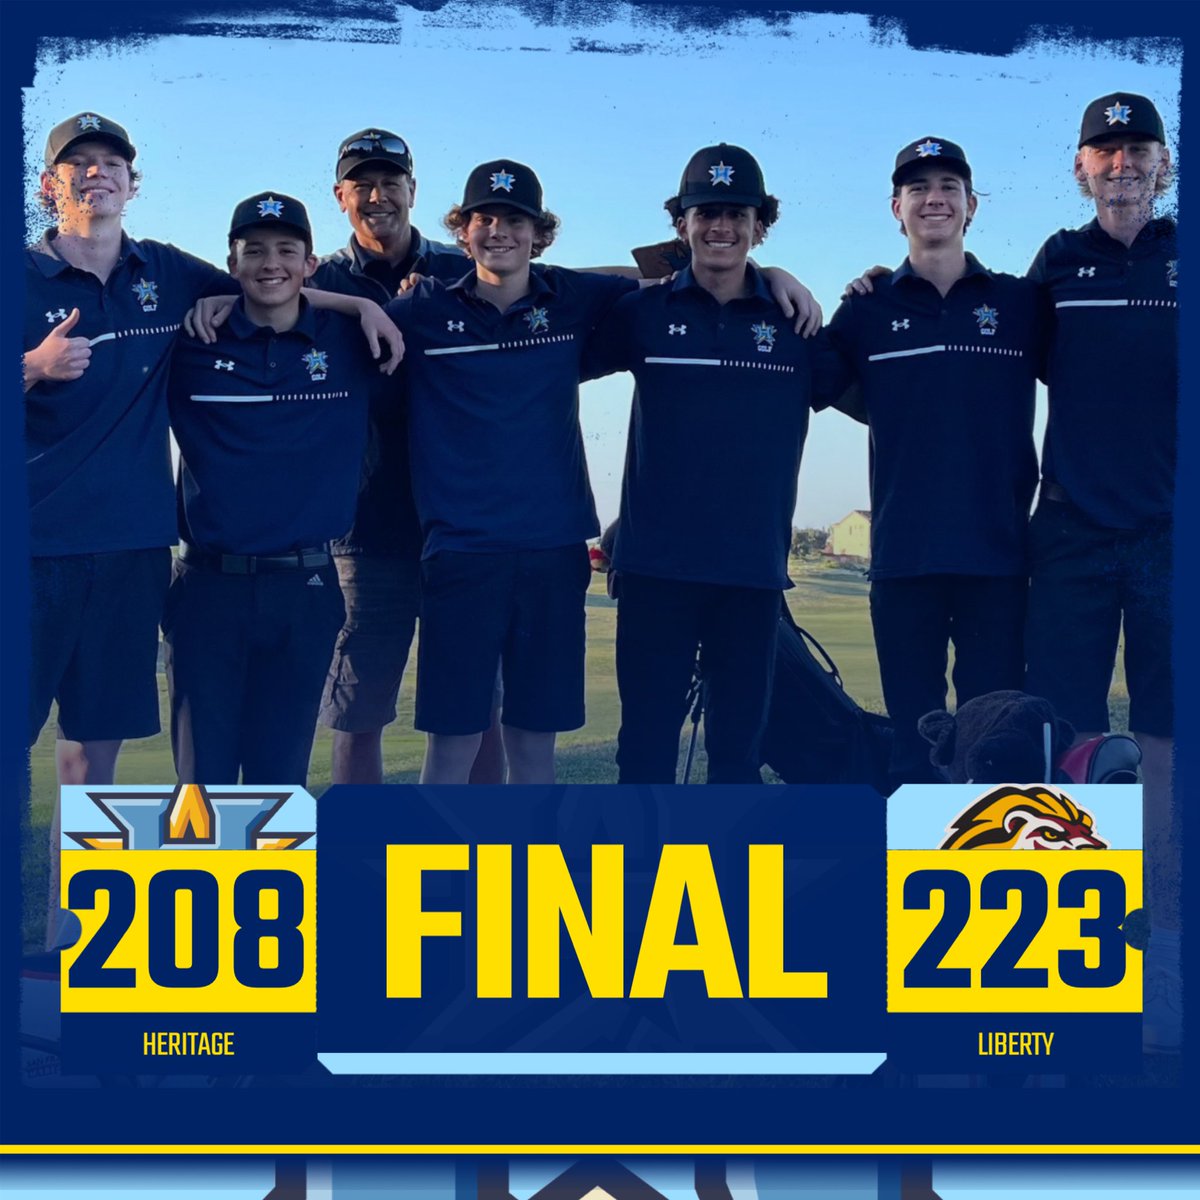 Trevor Hoople and Michael Davis shared medalist honors today, each shooting 39 to pace a big win over Liberty. Freshman Shane Nesbitt added a round of 40, while Jaxson Wilson and Evan Lopez shot 44 and 46 to round out the top five. Way to go boys! #GoPatriots